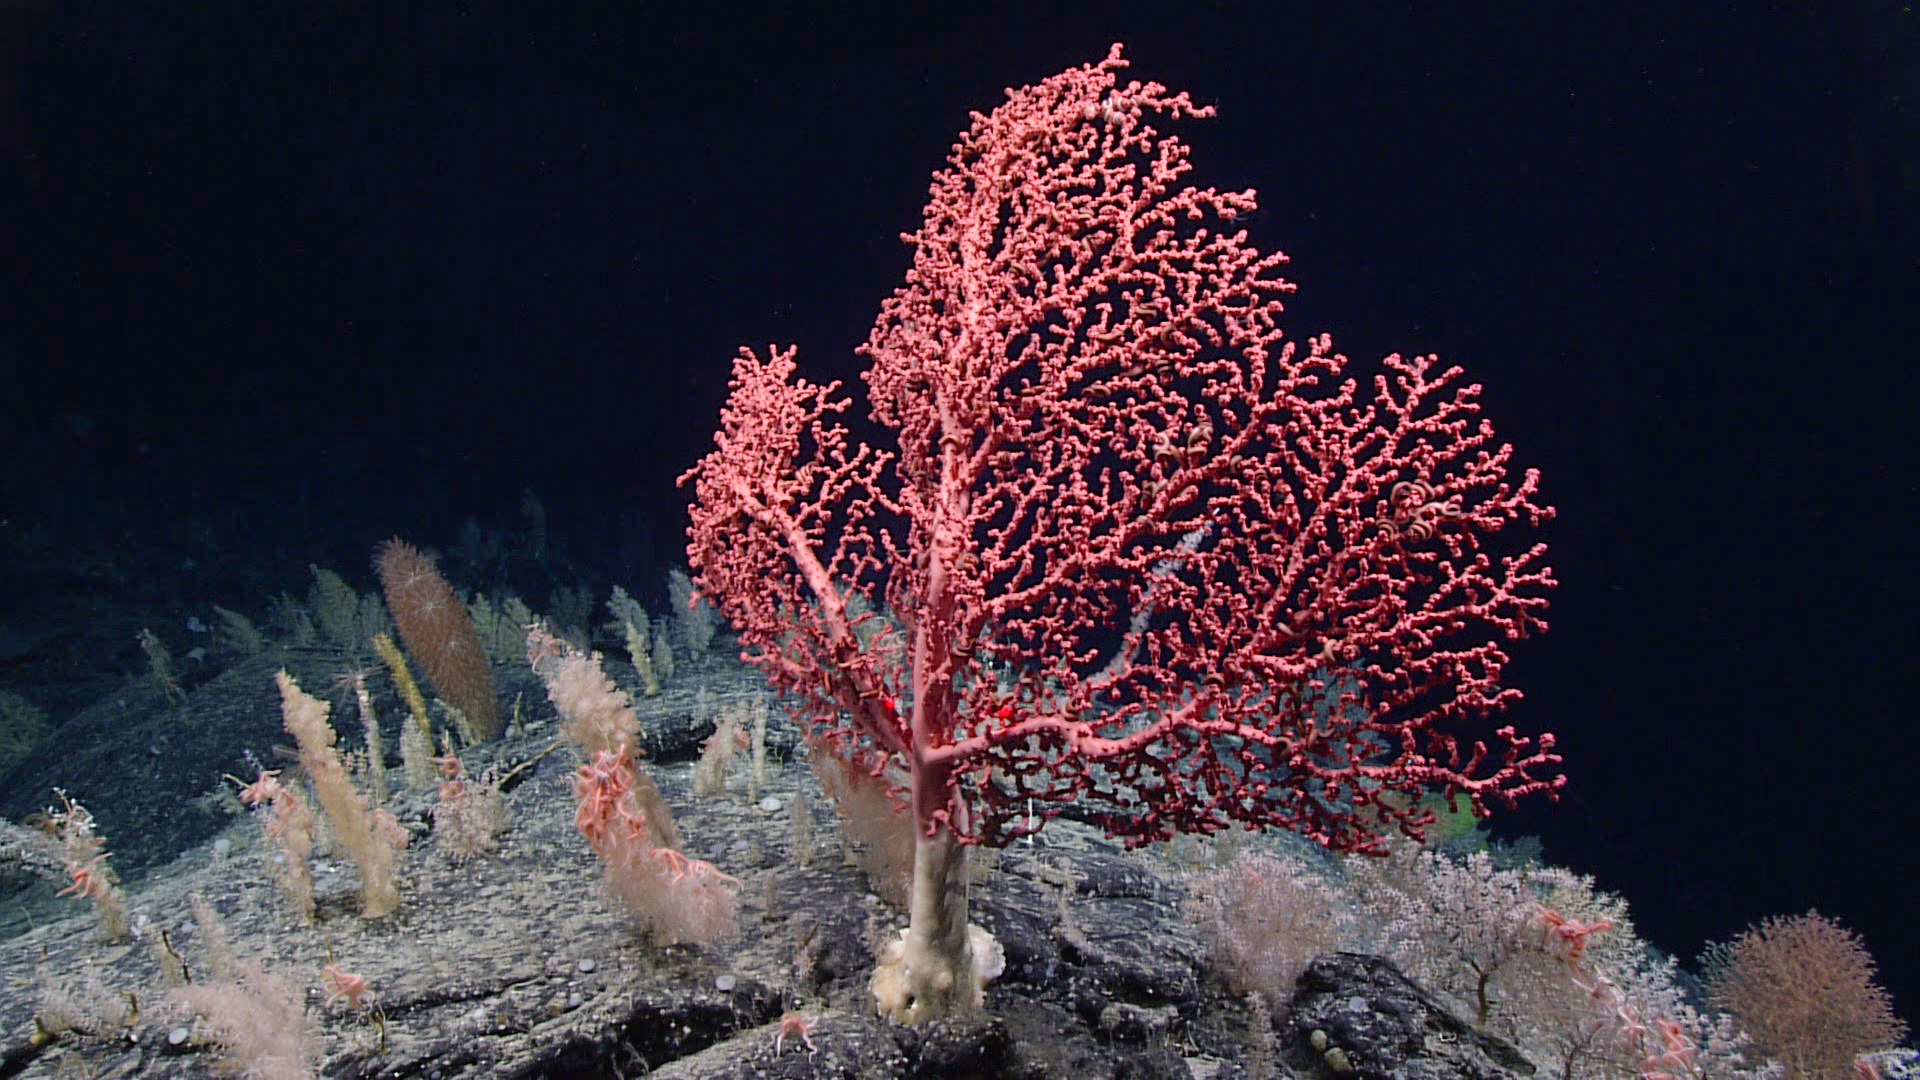 I wrote about deep-sea coral and sponge protections in the Northeast United States. This image shows a beautiful bubblegum coral observed during one of the expedition dives. Photo Credit: NOAA Ocean Exploration